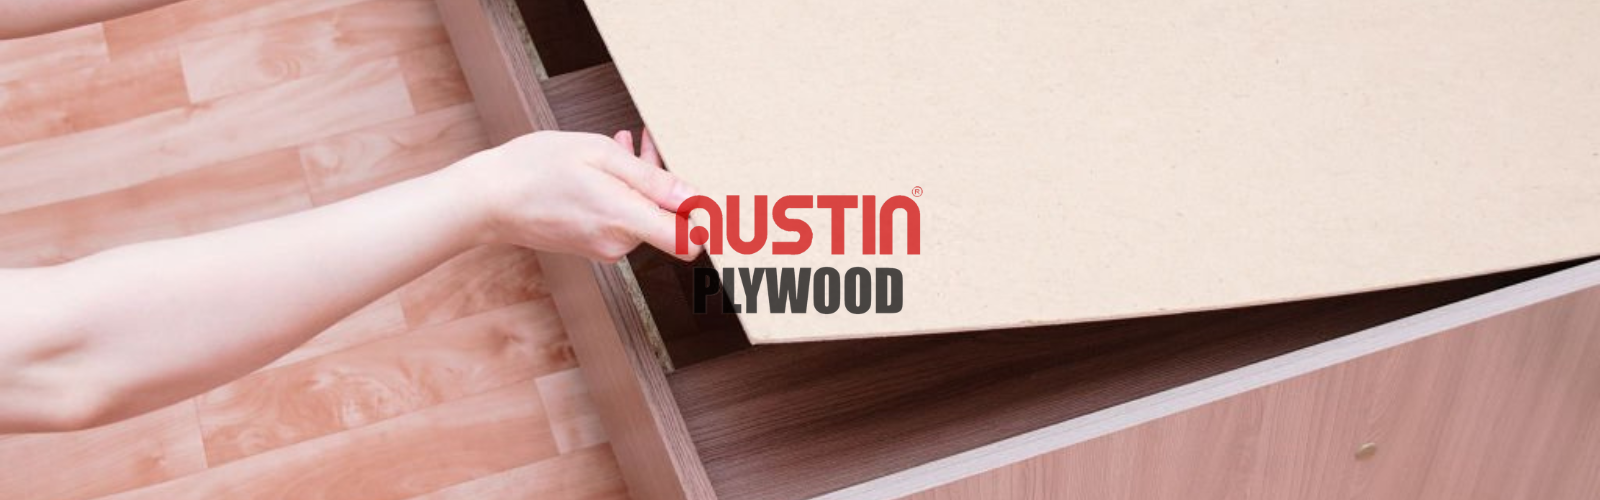 Best Plywood For Bed Frames - Austin Plywood